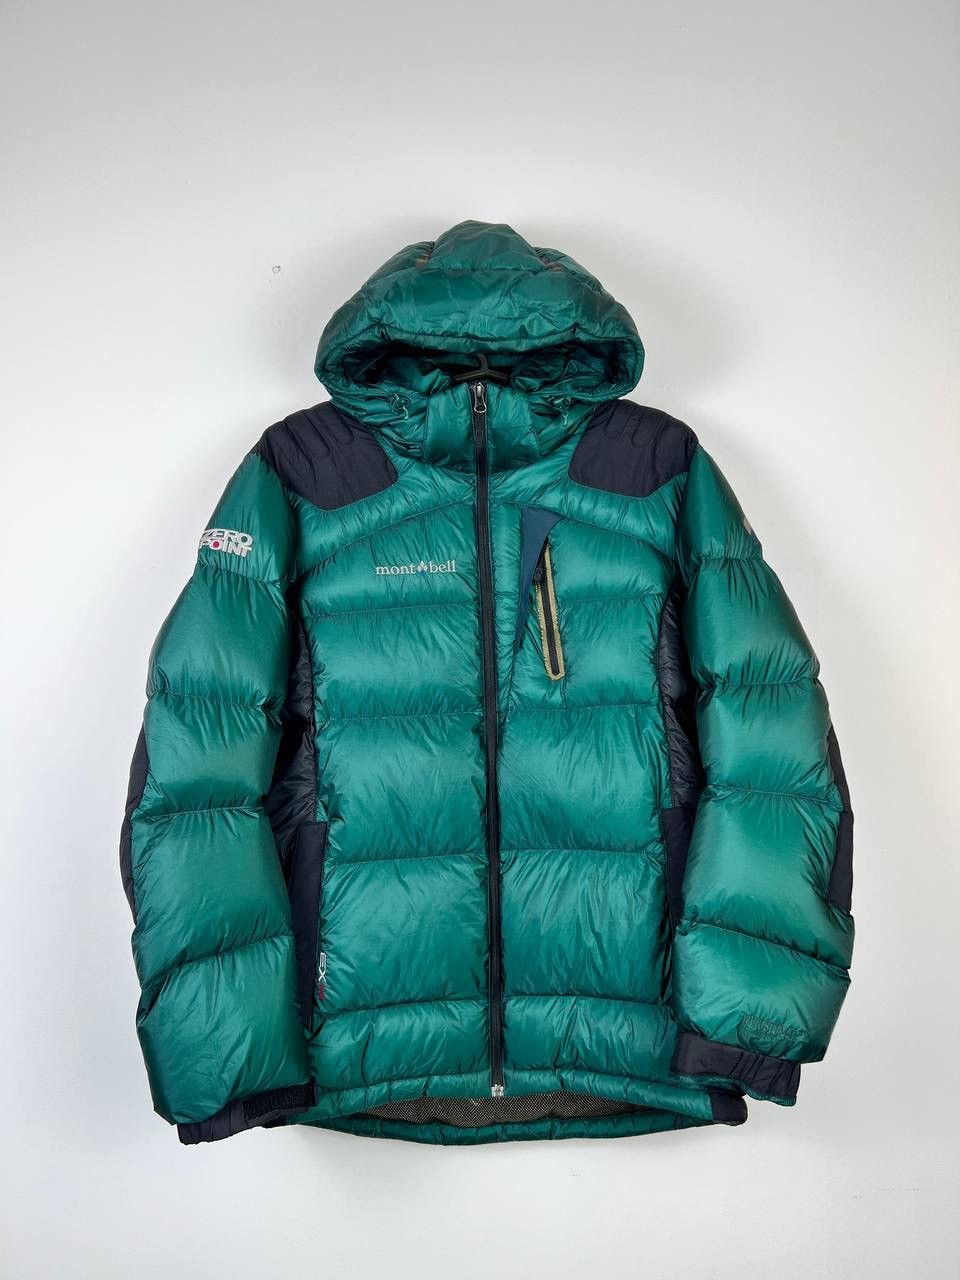 Montbell Montbell Down Jacket EX 1000 | Grailed